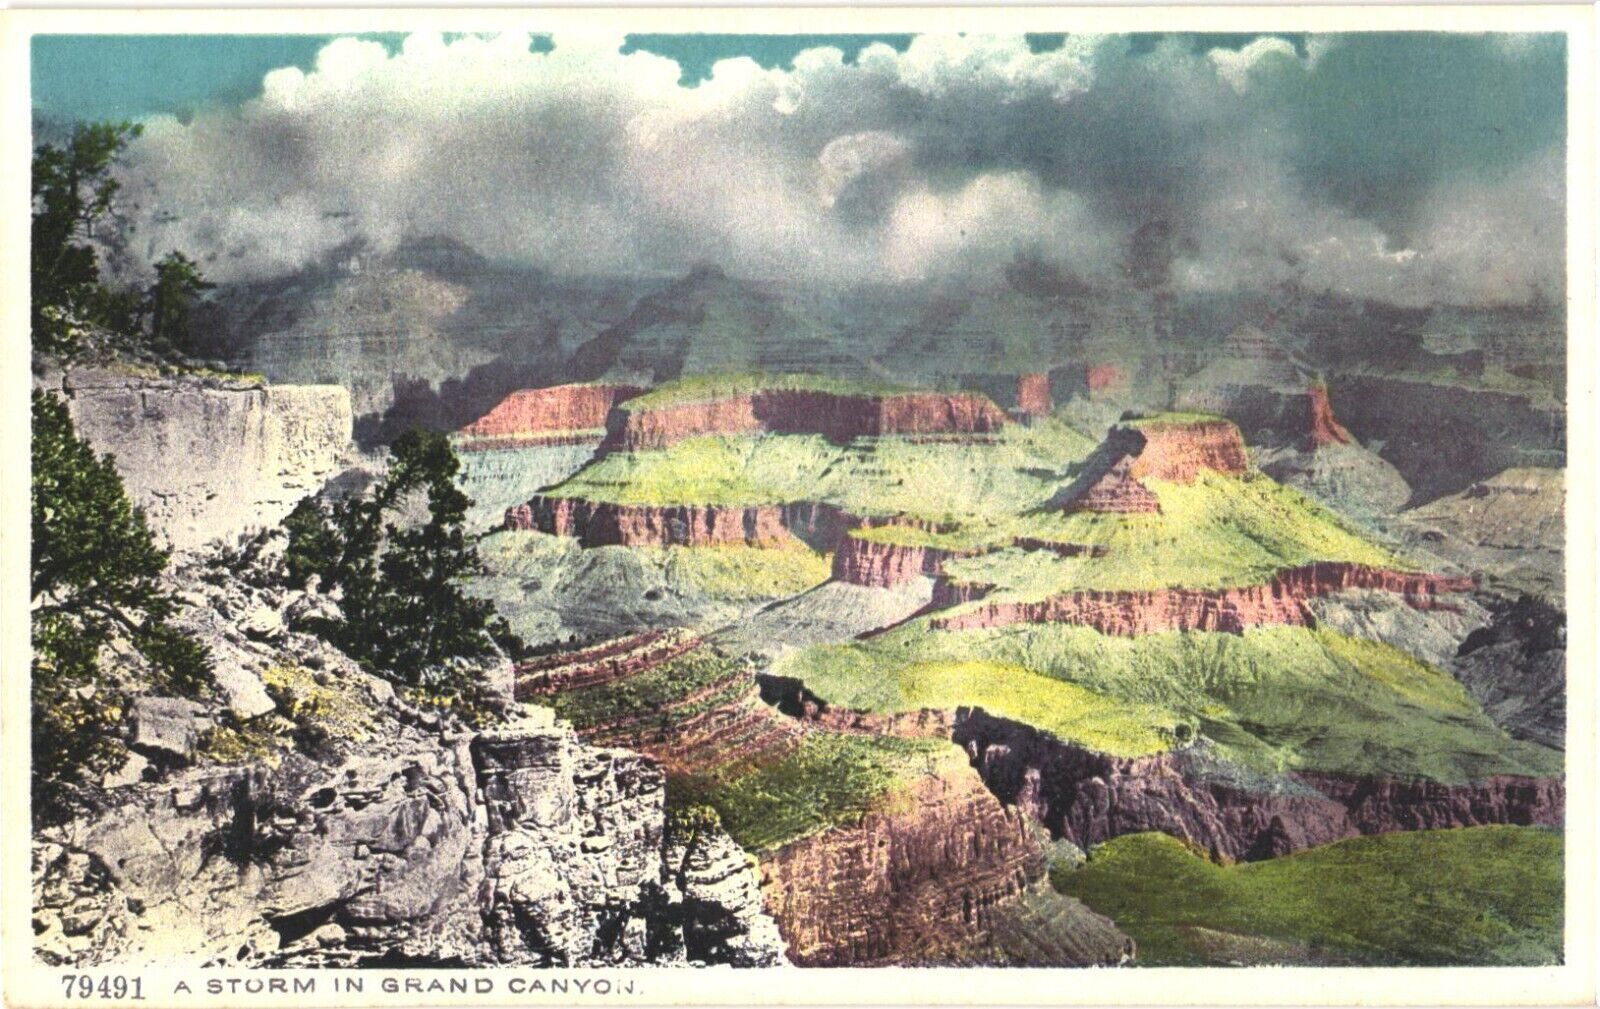 A Storm in Grand Canyon, Masses of Grey Clouds, Arizona Postcard